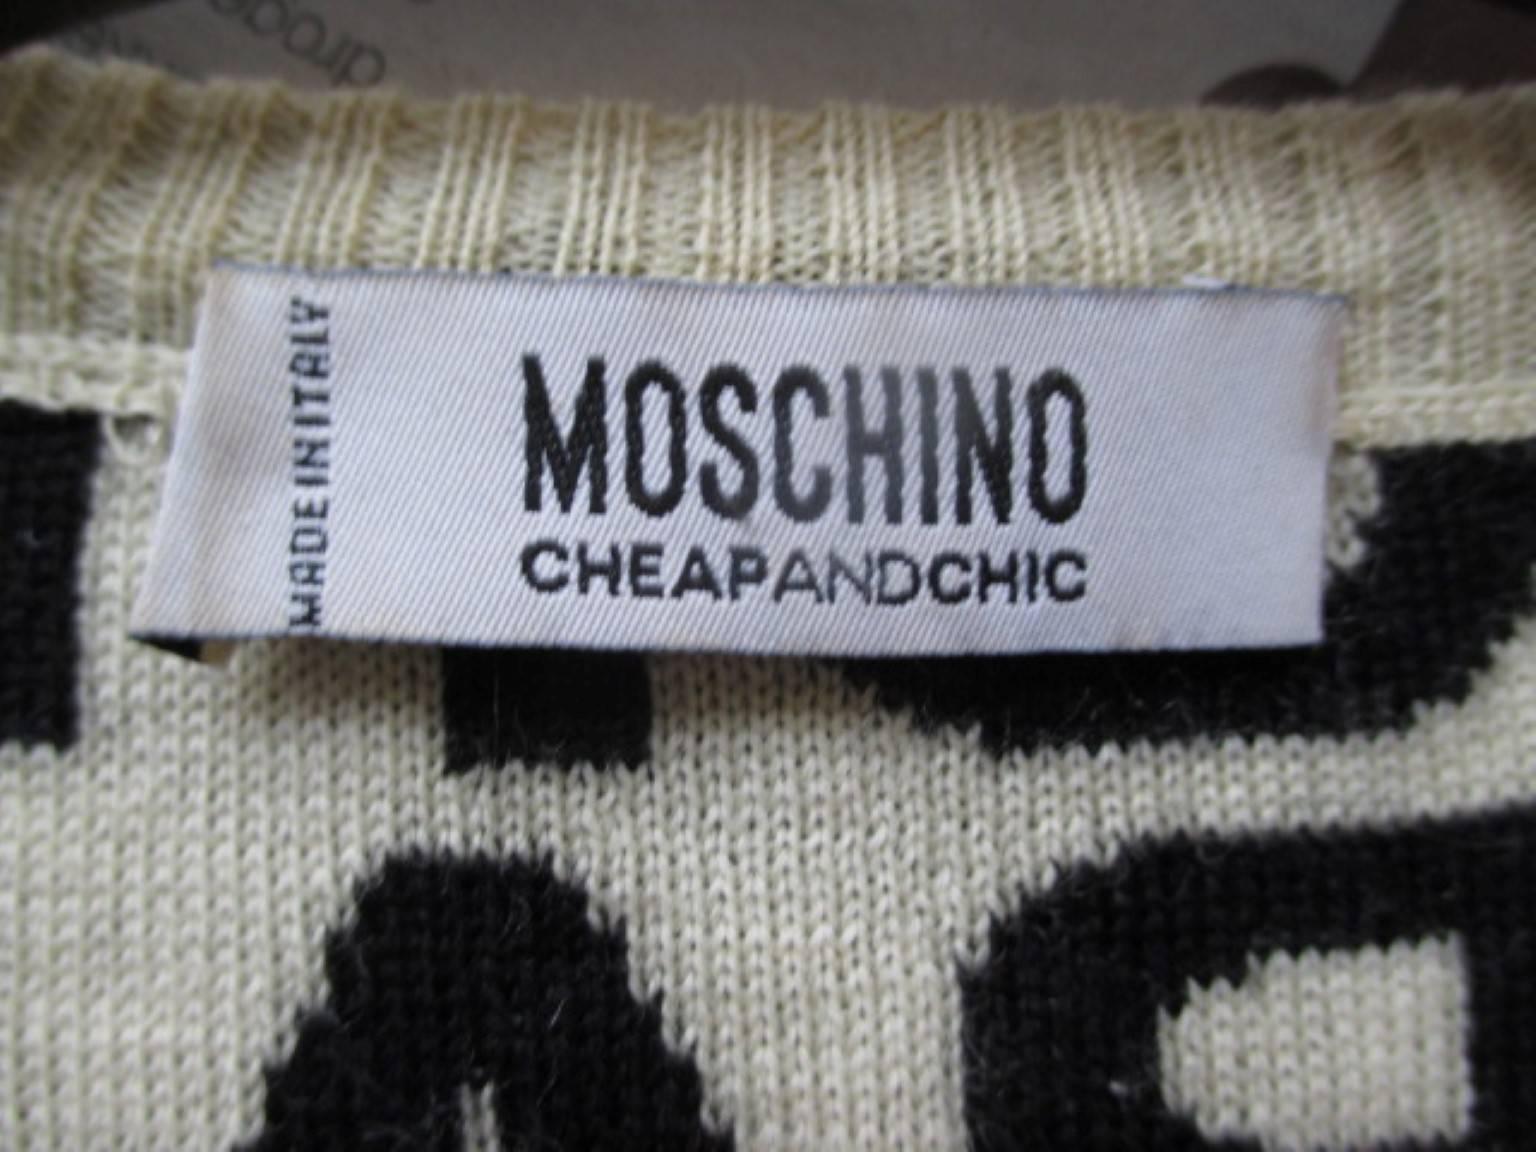 This Moschino sweater is made of 100% wool and is in vintage condition with some wear.
Size fits like a small/ US 8/ EU 38